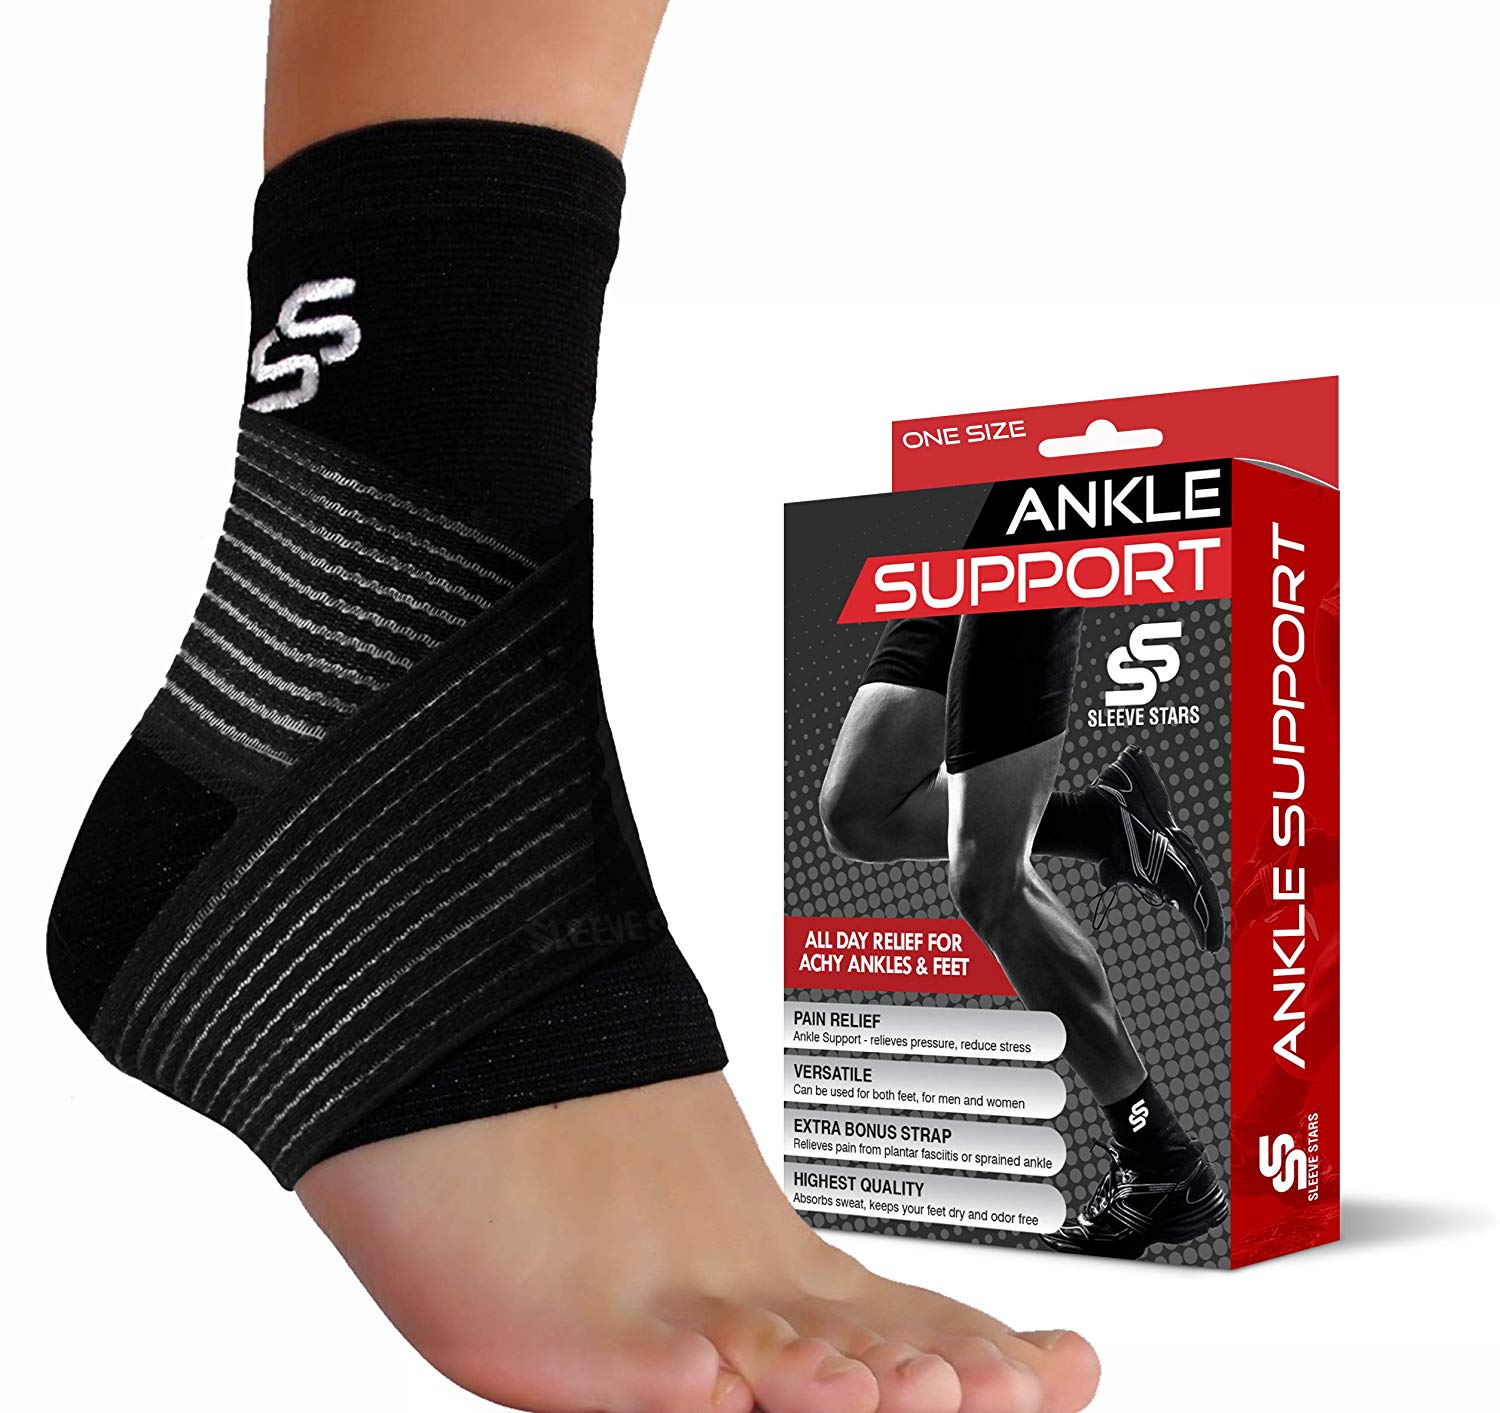 Ankle Brace for Plantar Fasciitis and Ankle Support